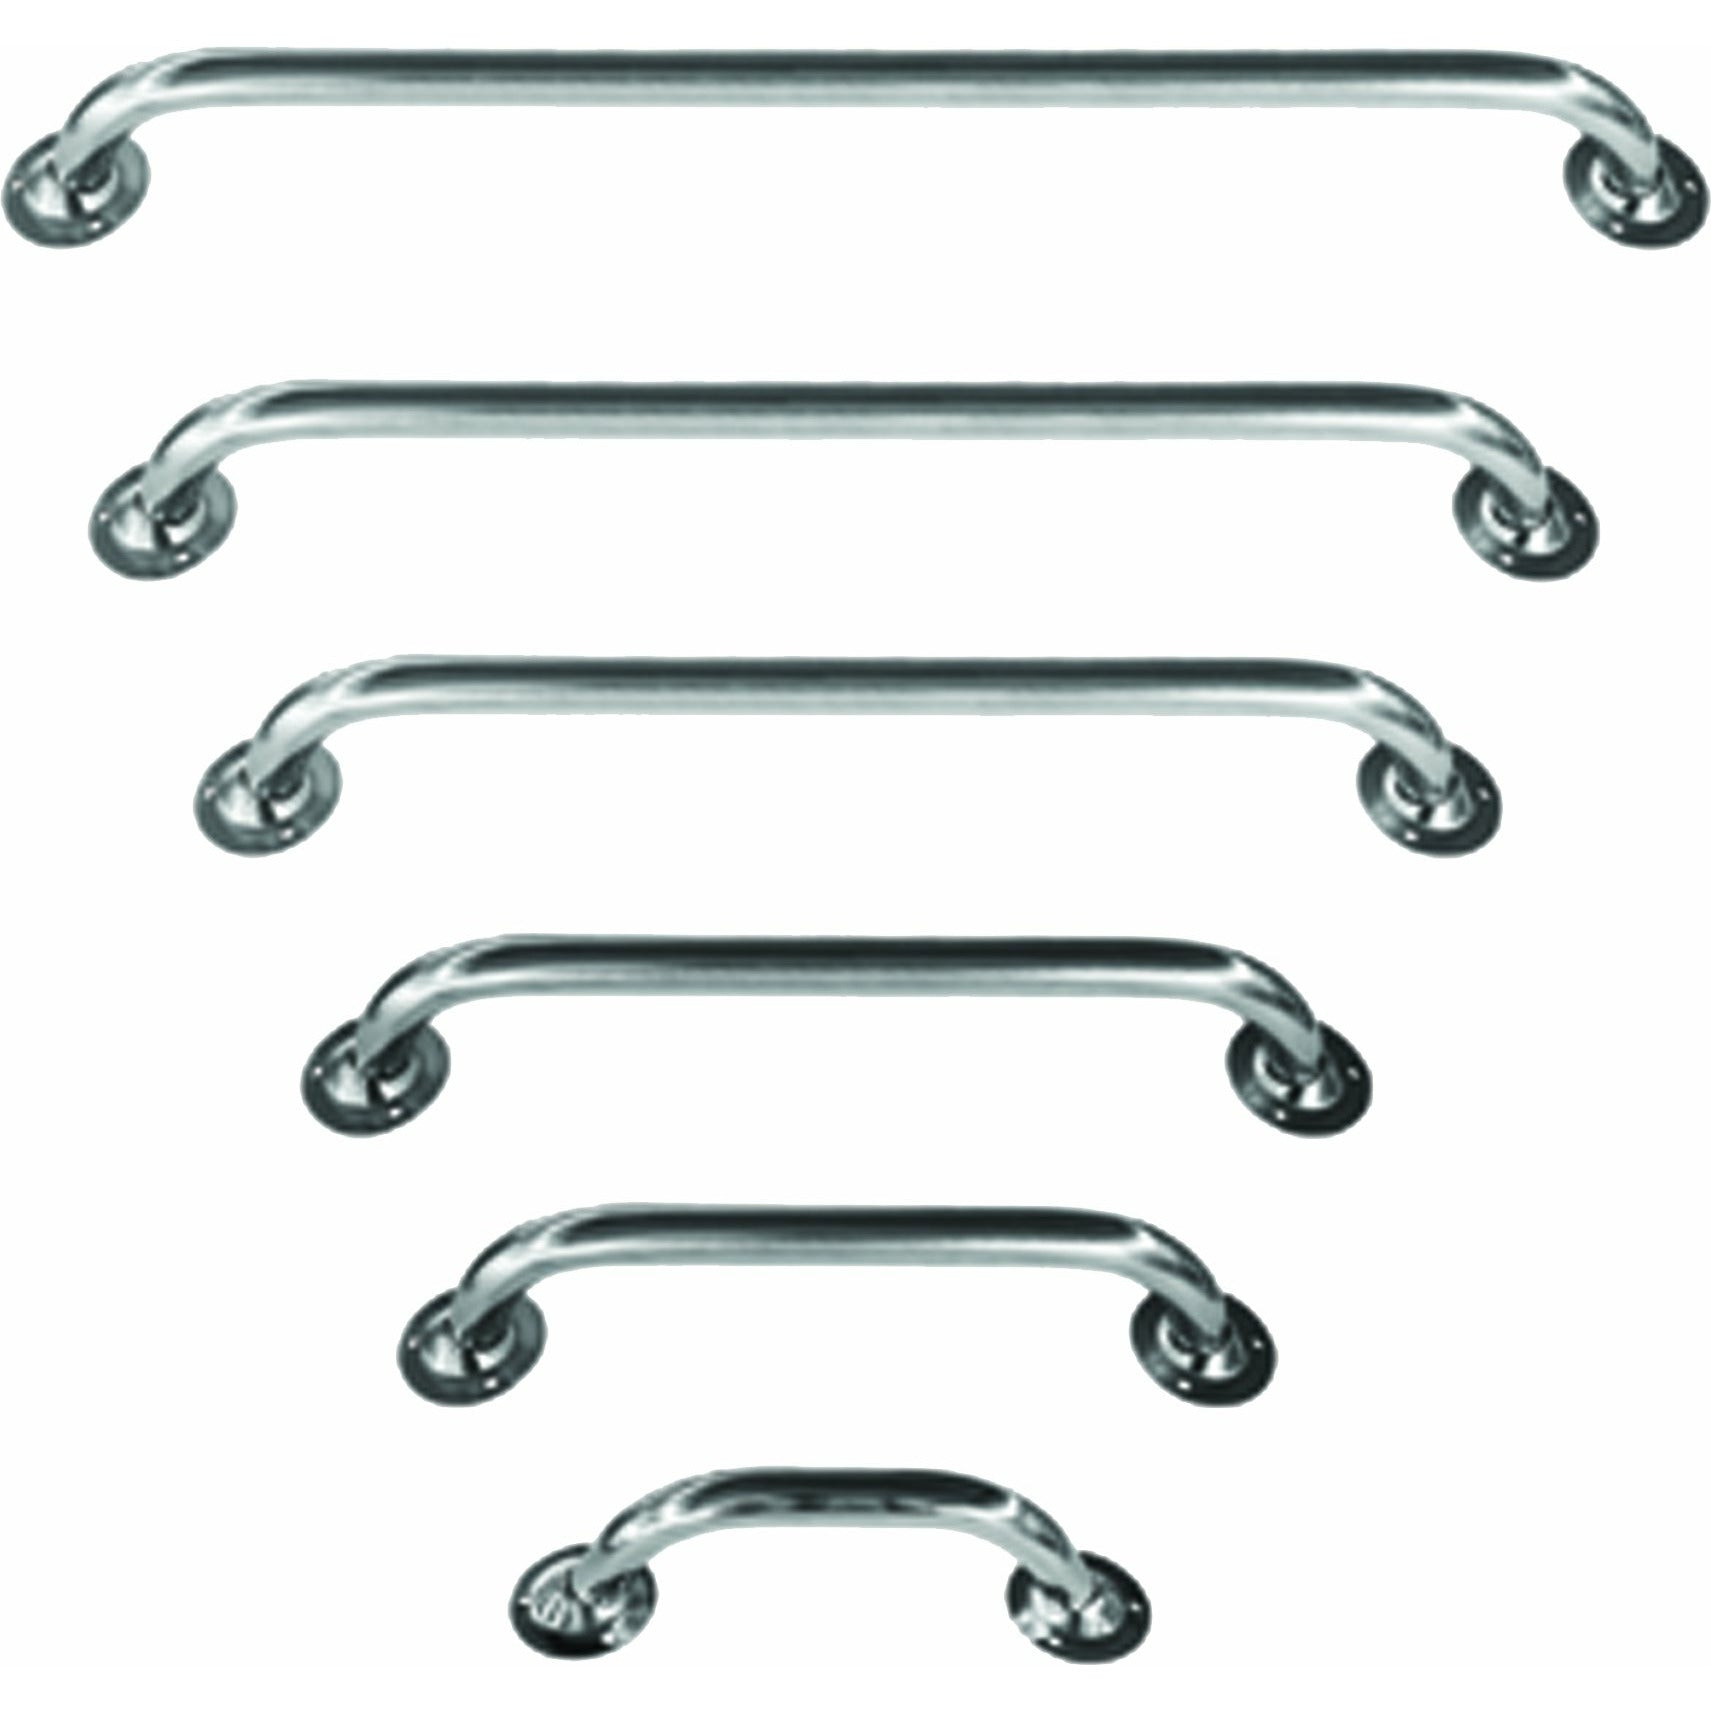 Talamex S.Steel Hand Rails With Bases 22X200 72135220